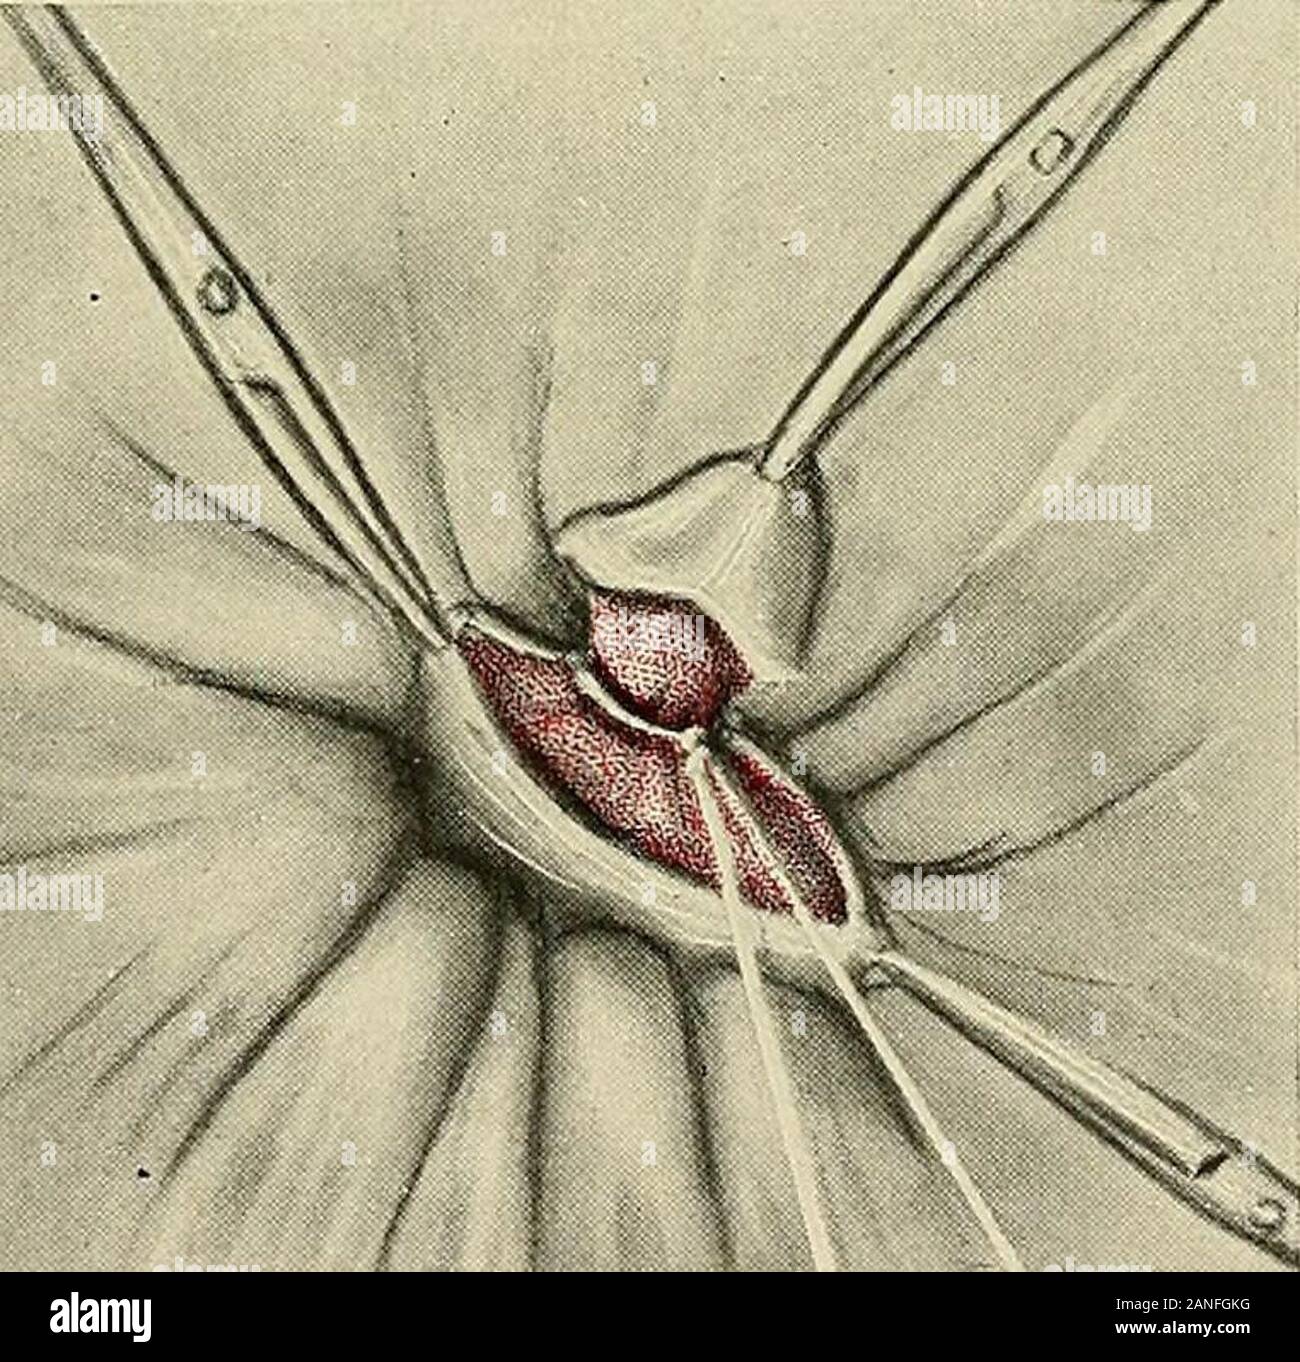 Gynecology . YllP.Gr- Fig. 414.—Ligation of Hemorrhoids.The hemorrhoid has  been grasped and brought to view by fine pressure forceps. The hemorrhoid  is dissected by knife or scissors. sutures that approximate the skin